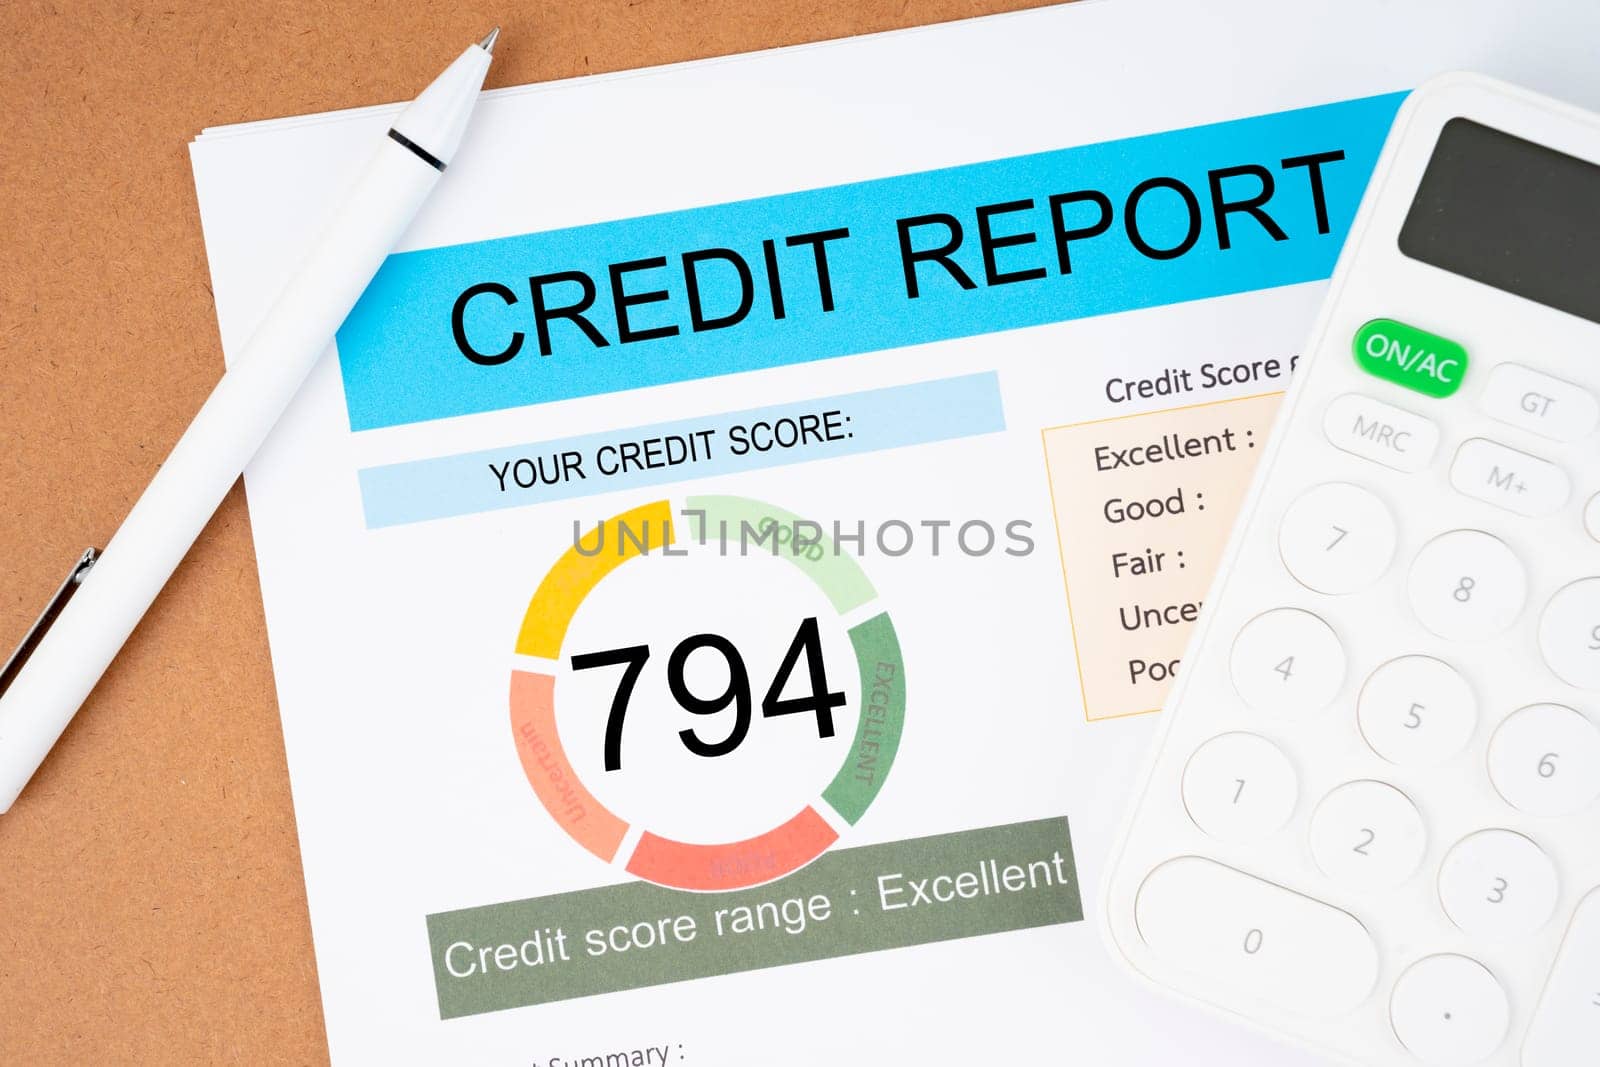 The Credit score report and calculator on the desk. by Gamjai